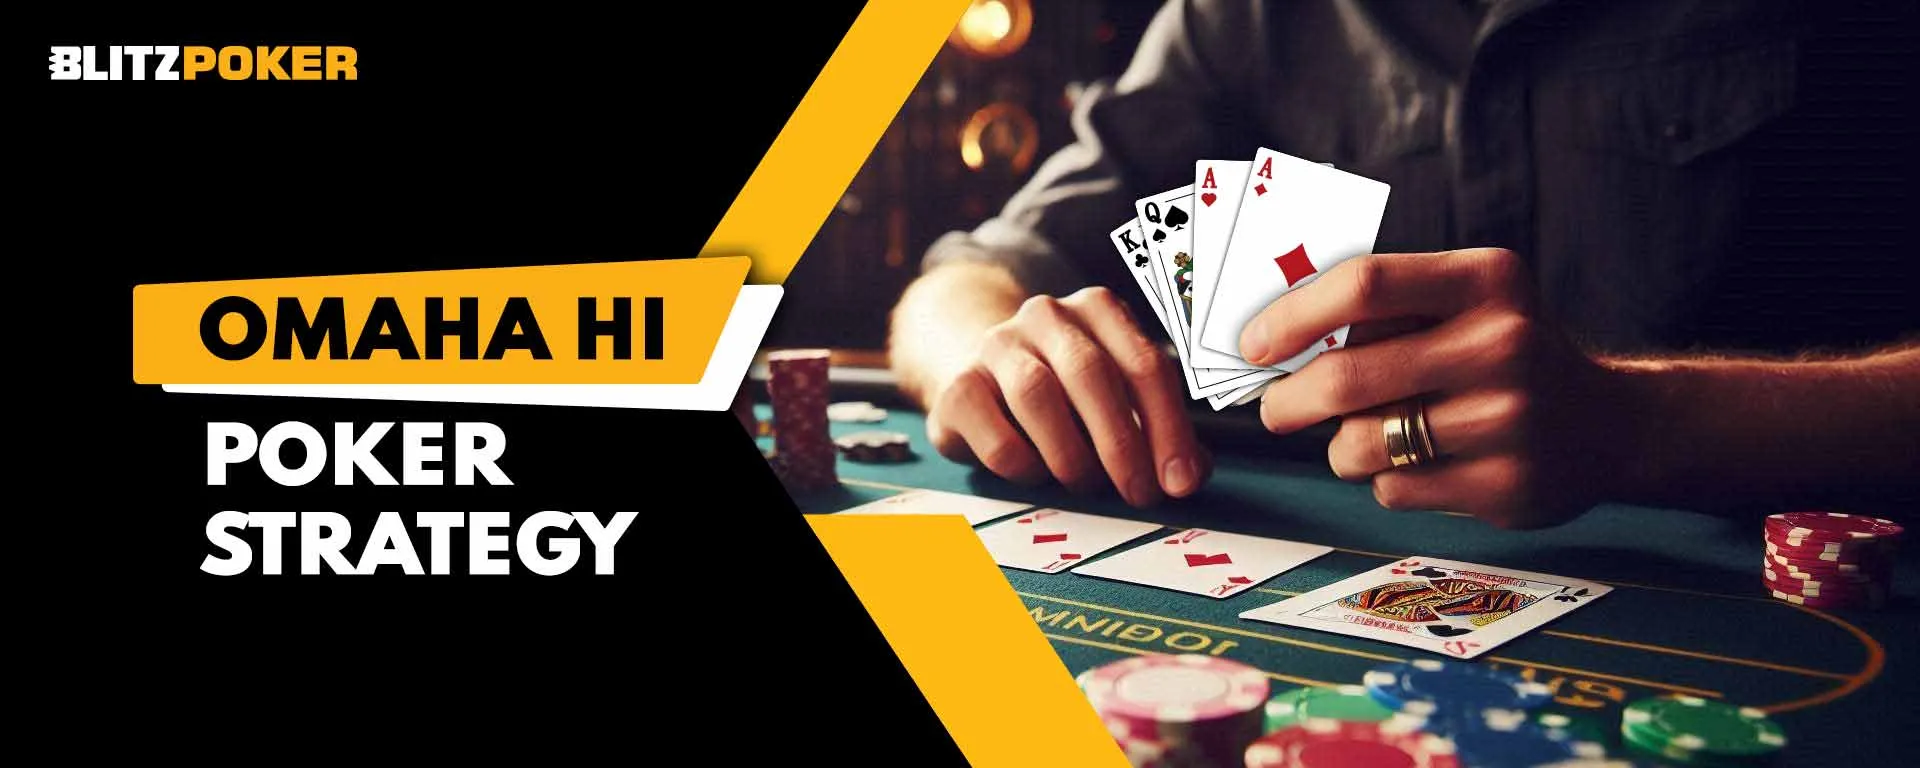 Omaha High Poker Strategy: The Ultimate Guide For Big Wins!